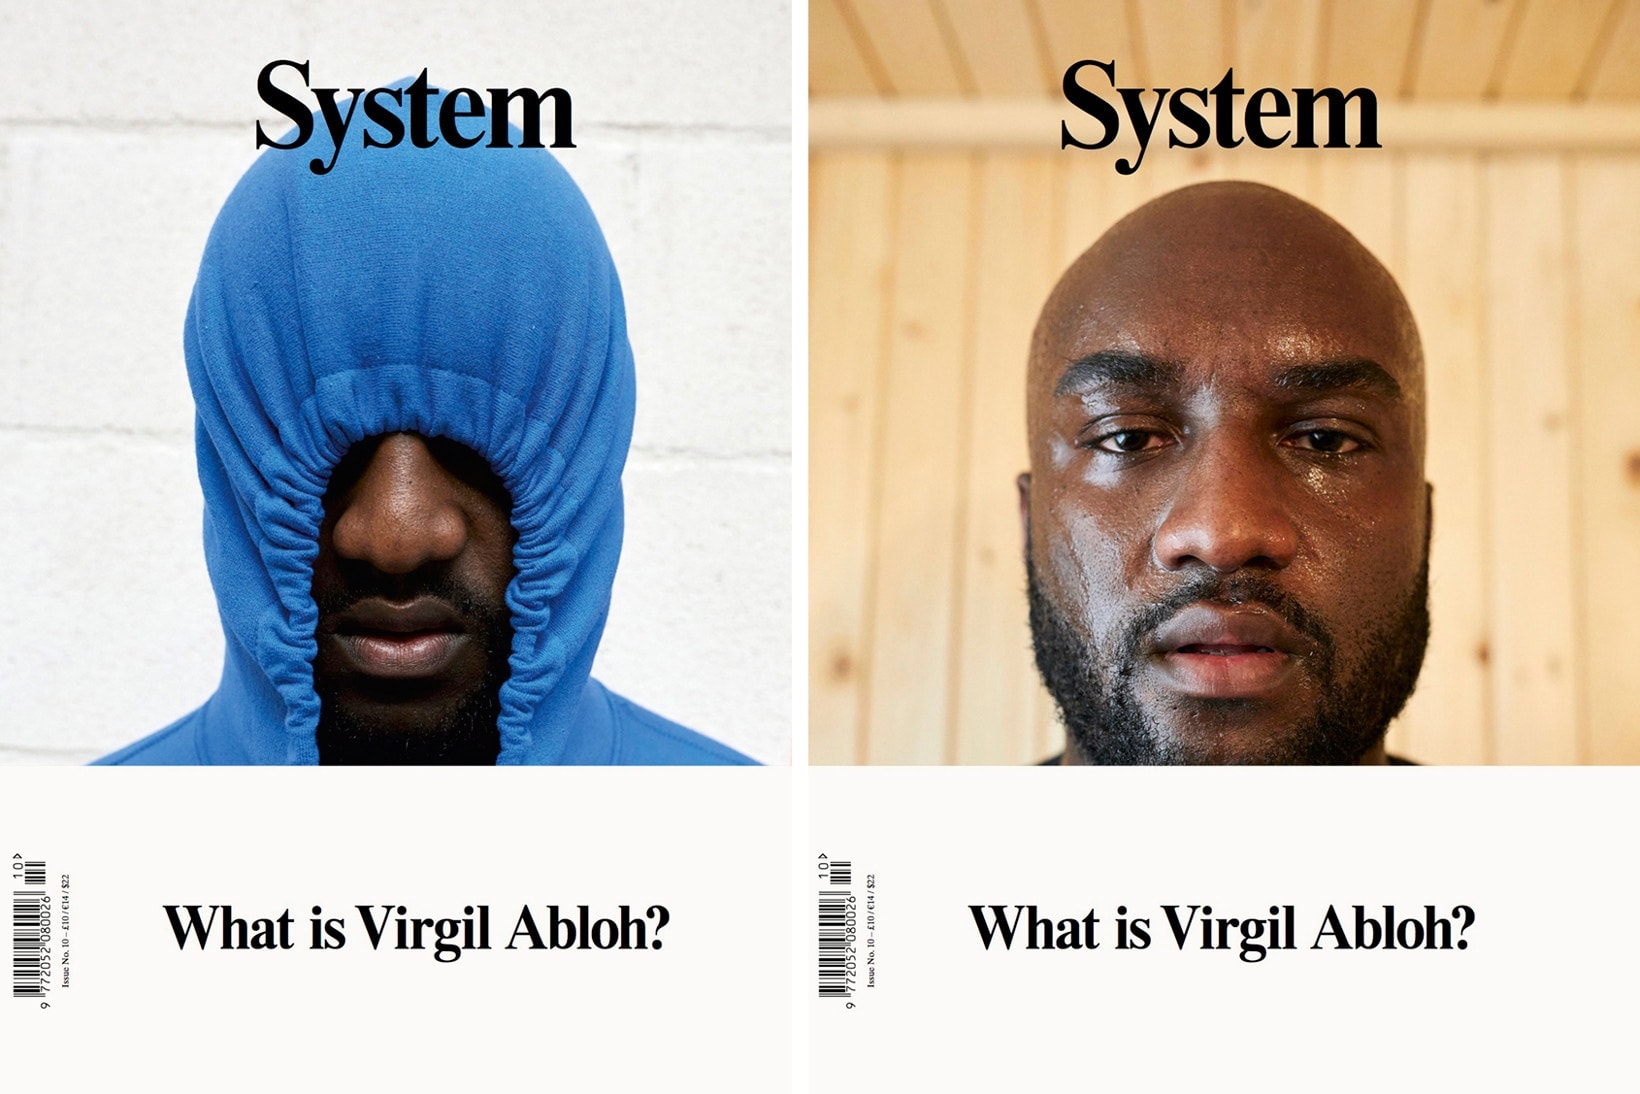 Virgil Abloh System Magazine Cover Signing London England United Kingdom 2017 December 4 Monday Shreej Newsagents Cover issue 10 ten